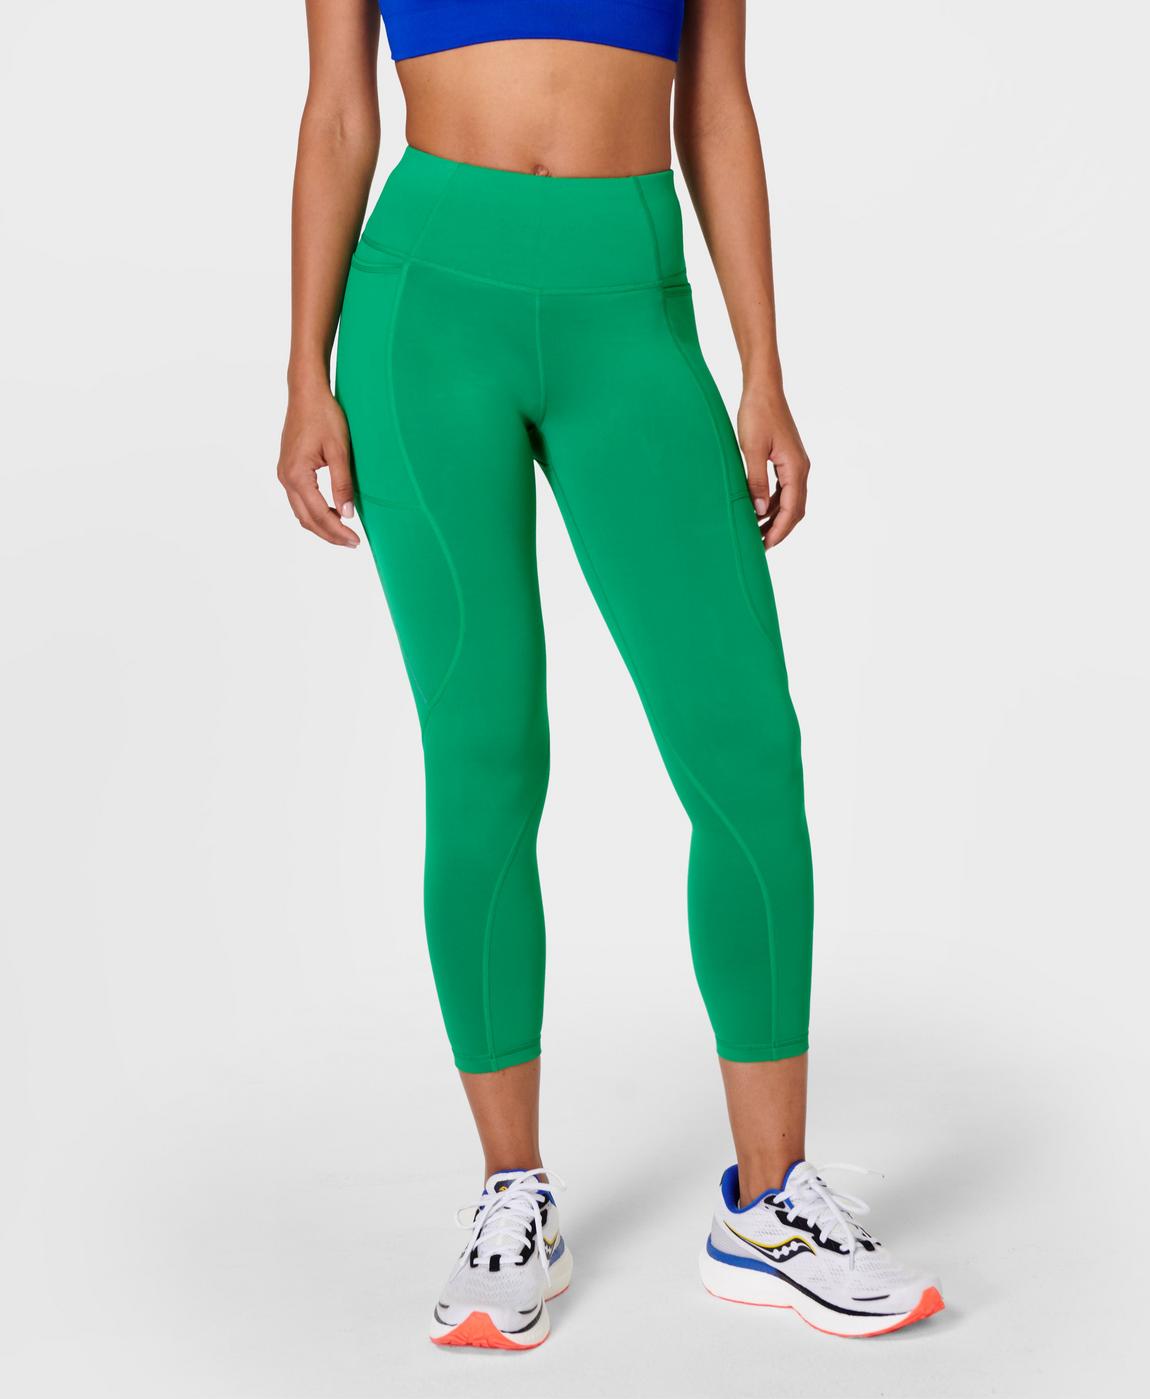 Therma Boost 2.0 7/8 Reflective Running Leggings - Electro Green